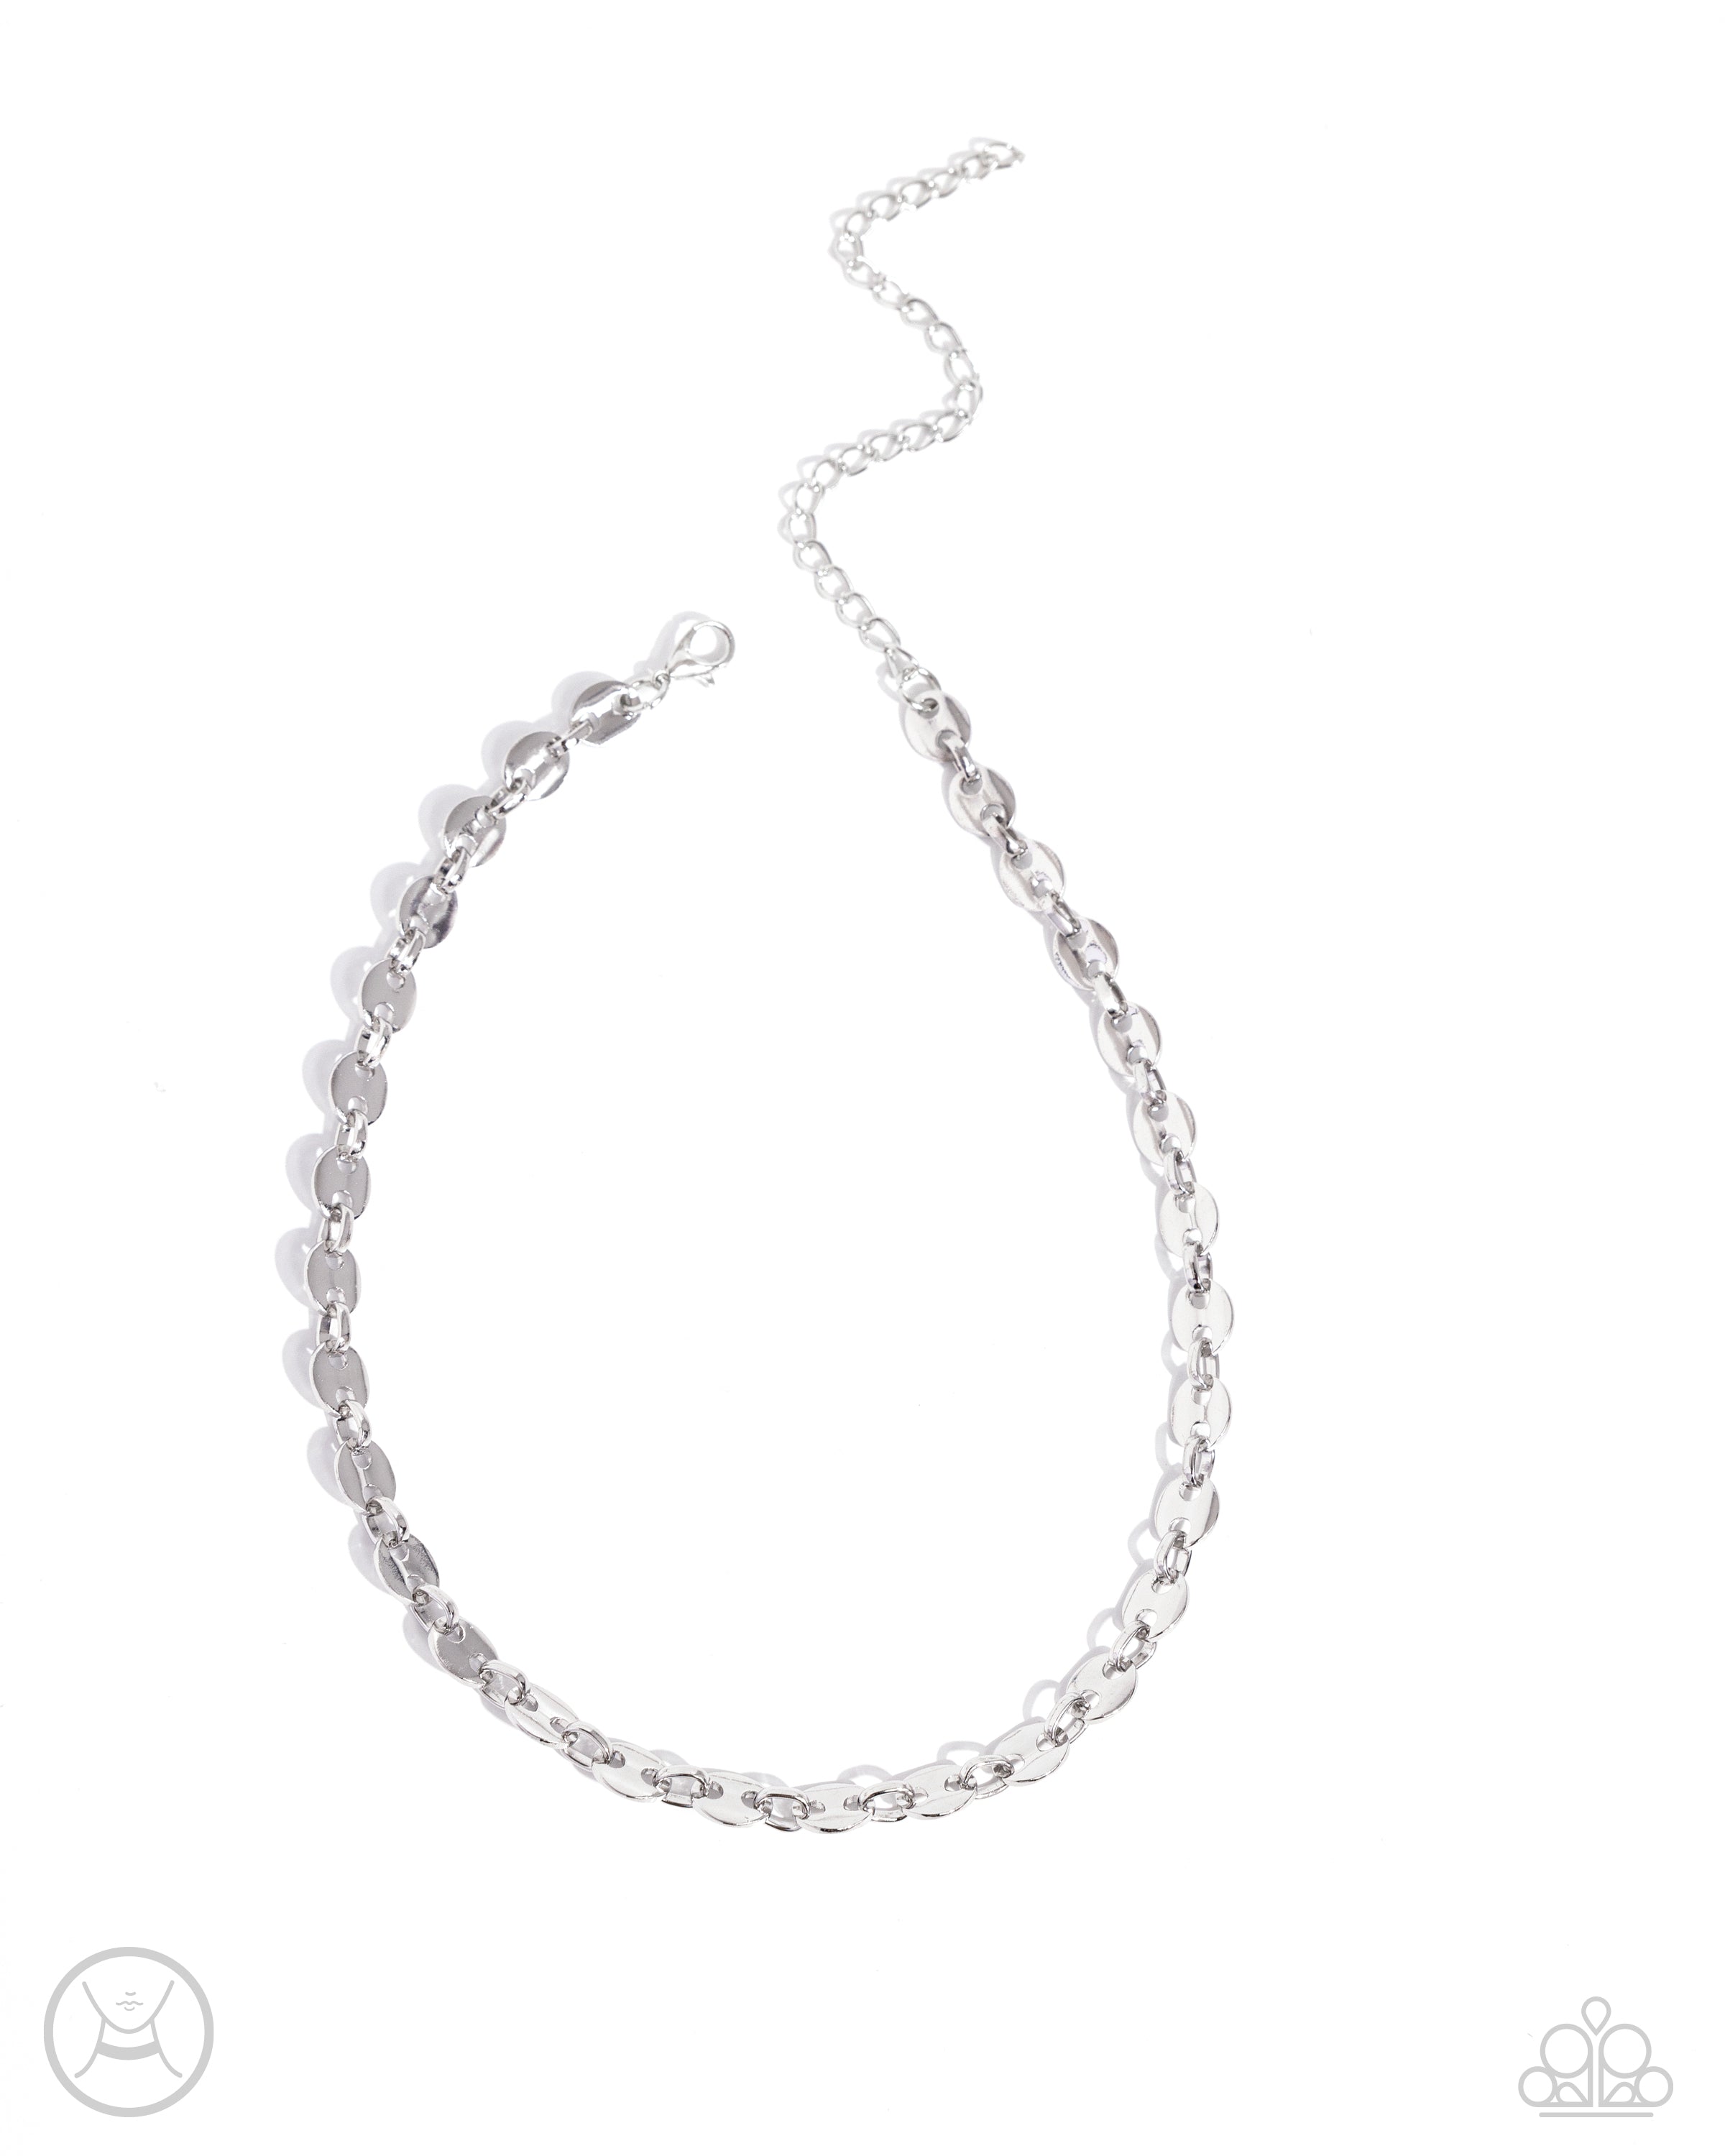 ABSTRACT ADVOCATE SILVER-NECKLACE